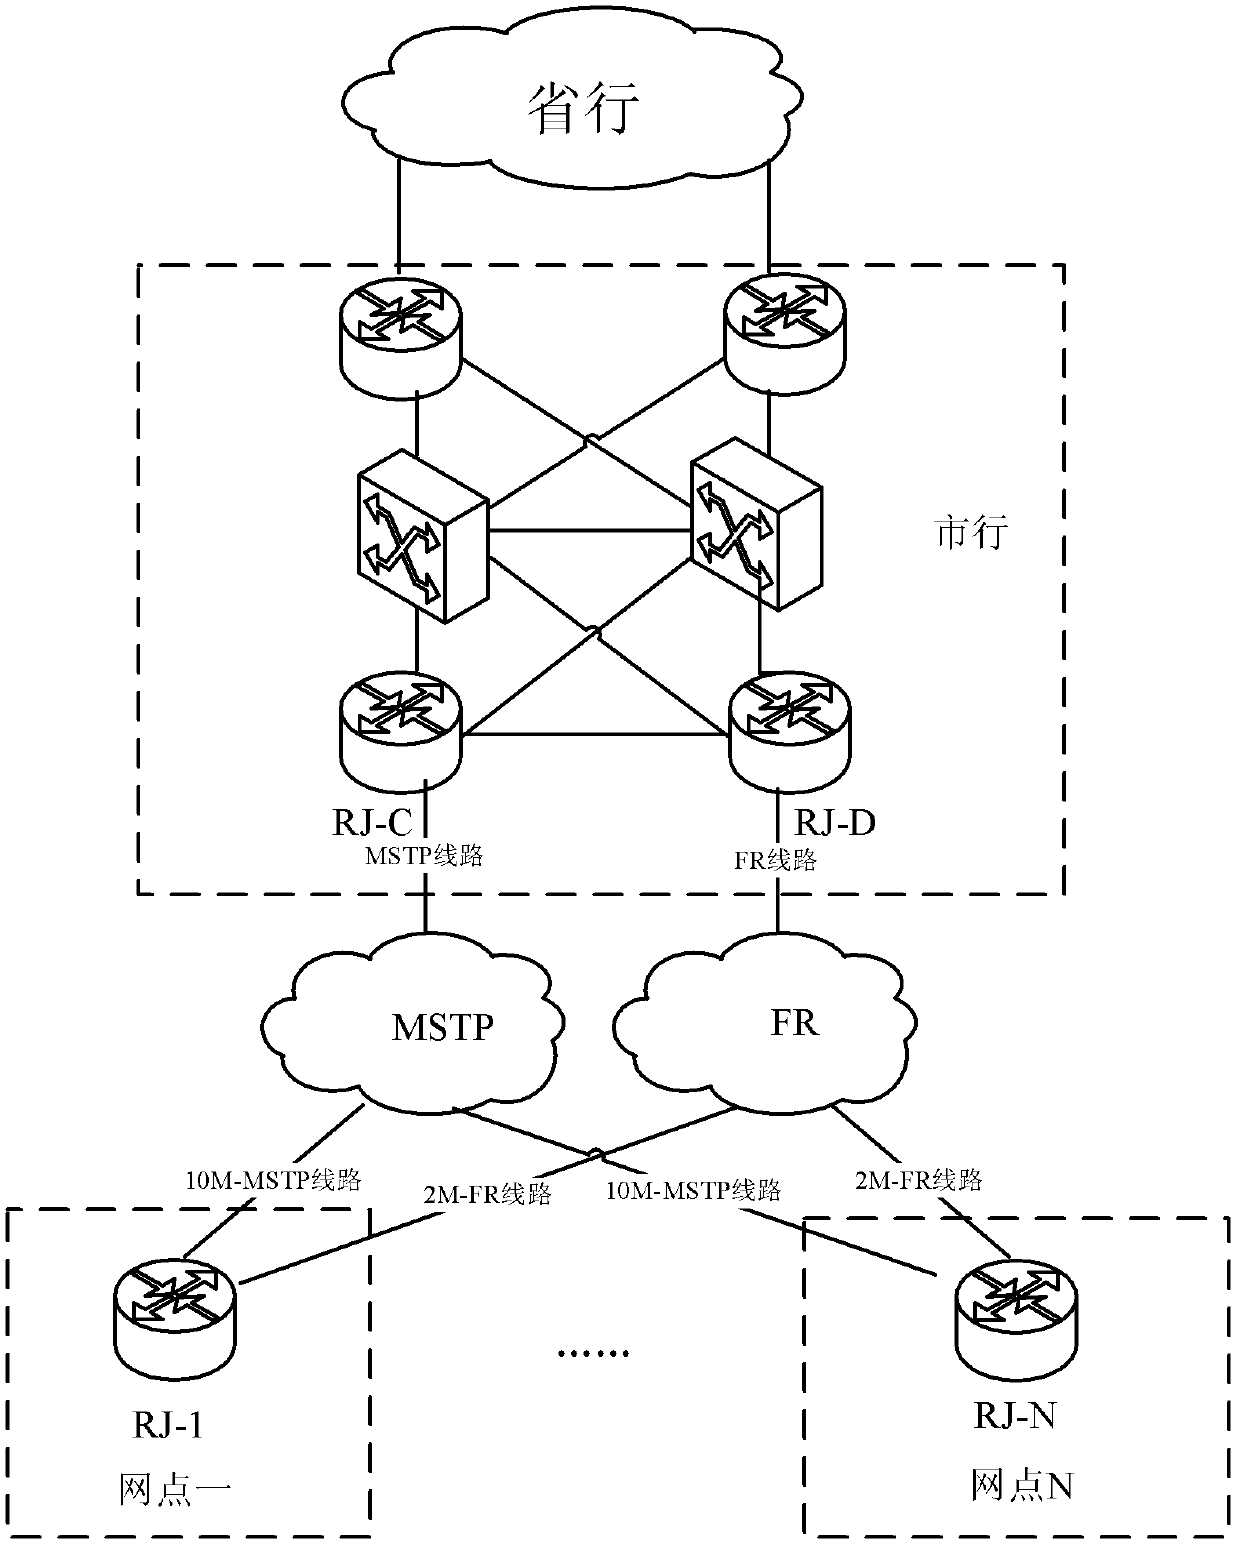 Method, device and network equipment for realizing bidirectional forwarding detection